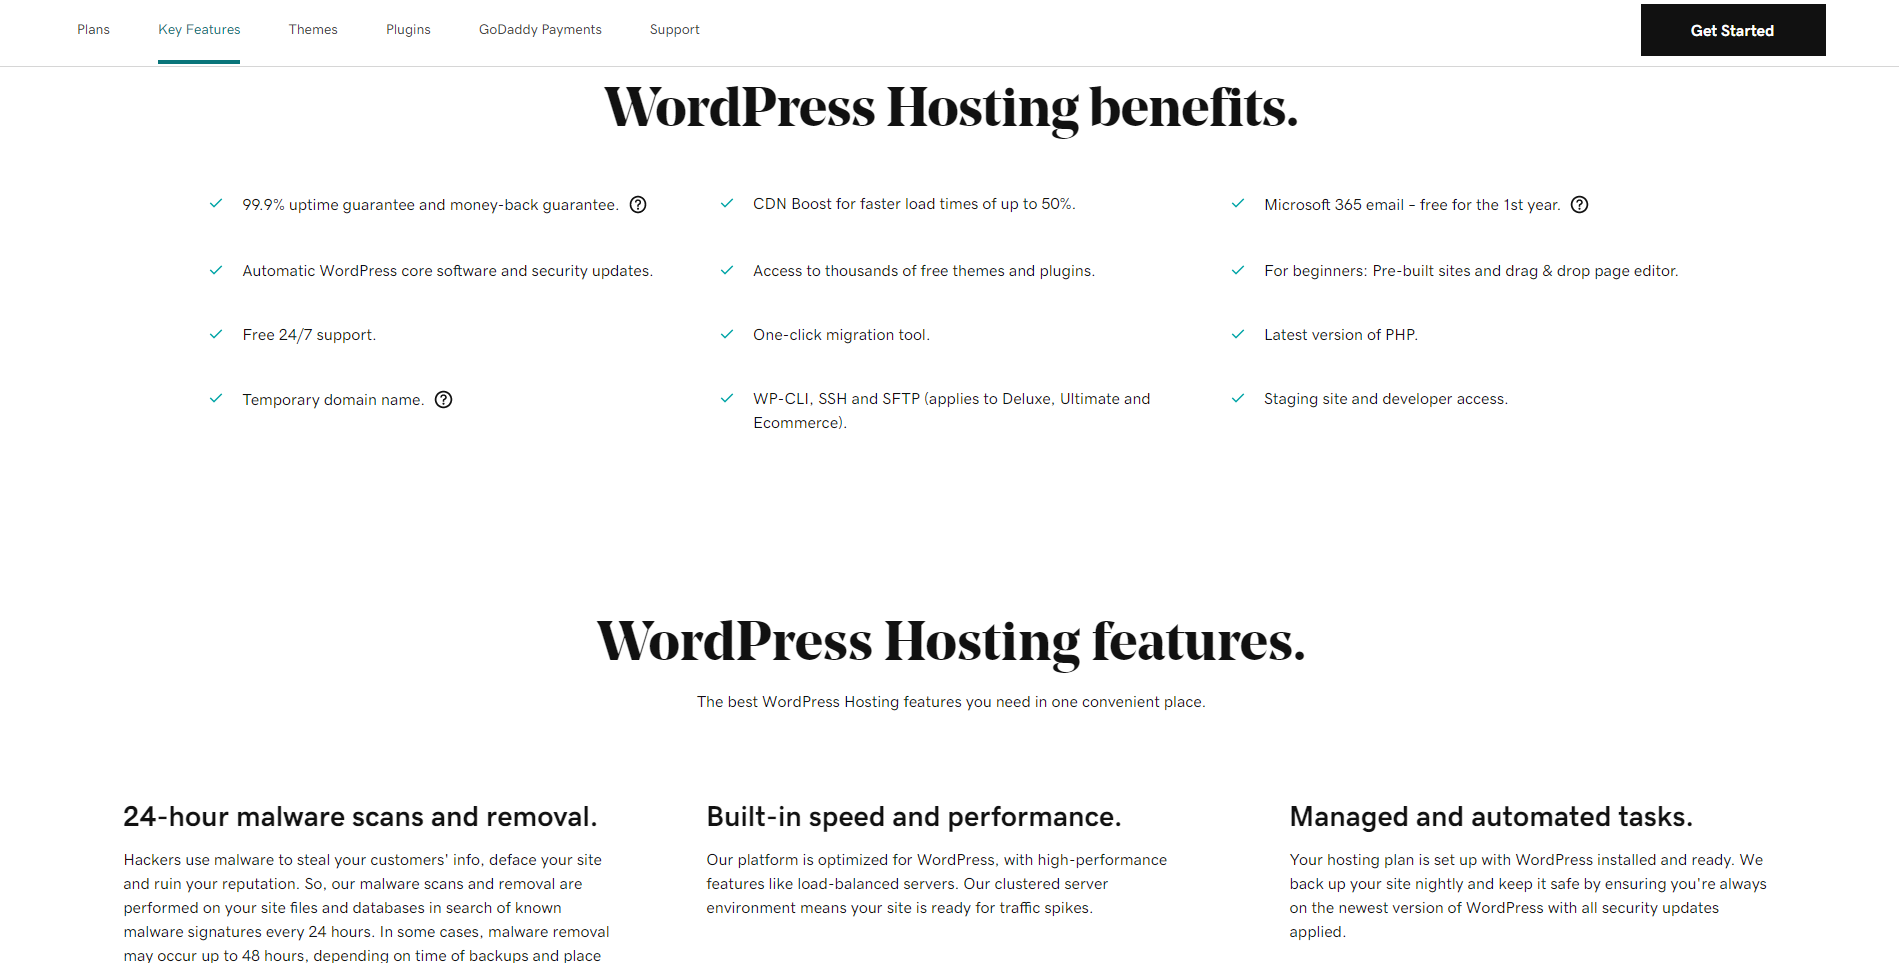 WordPress features for GoDaddy and the benefits of using it